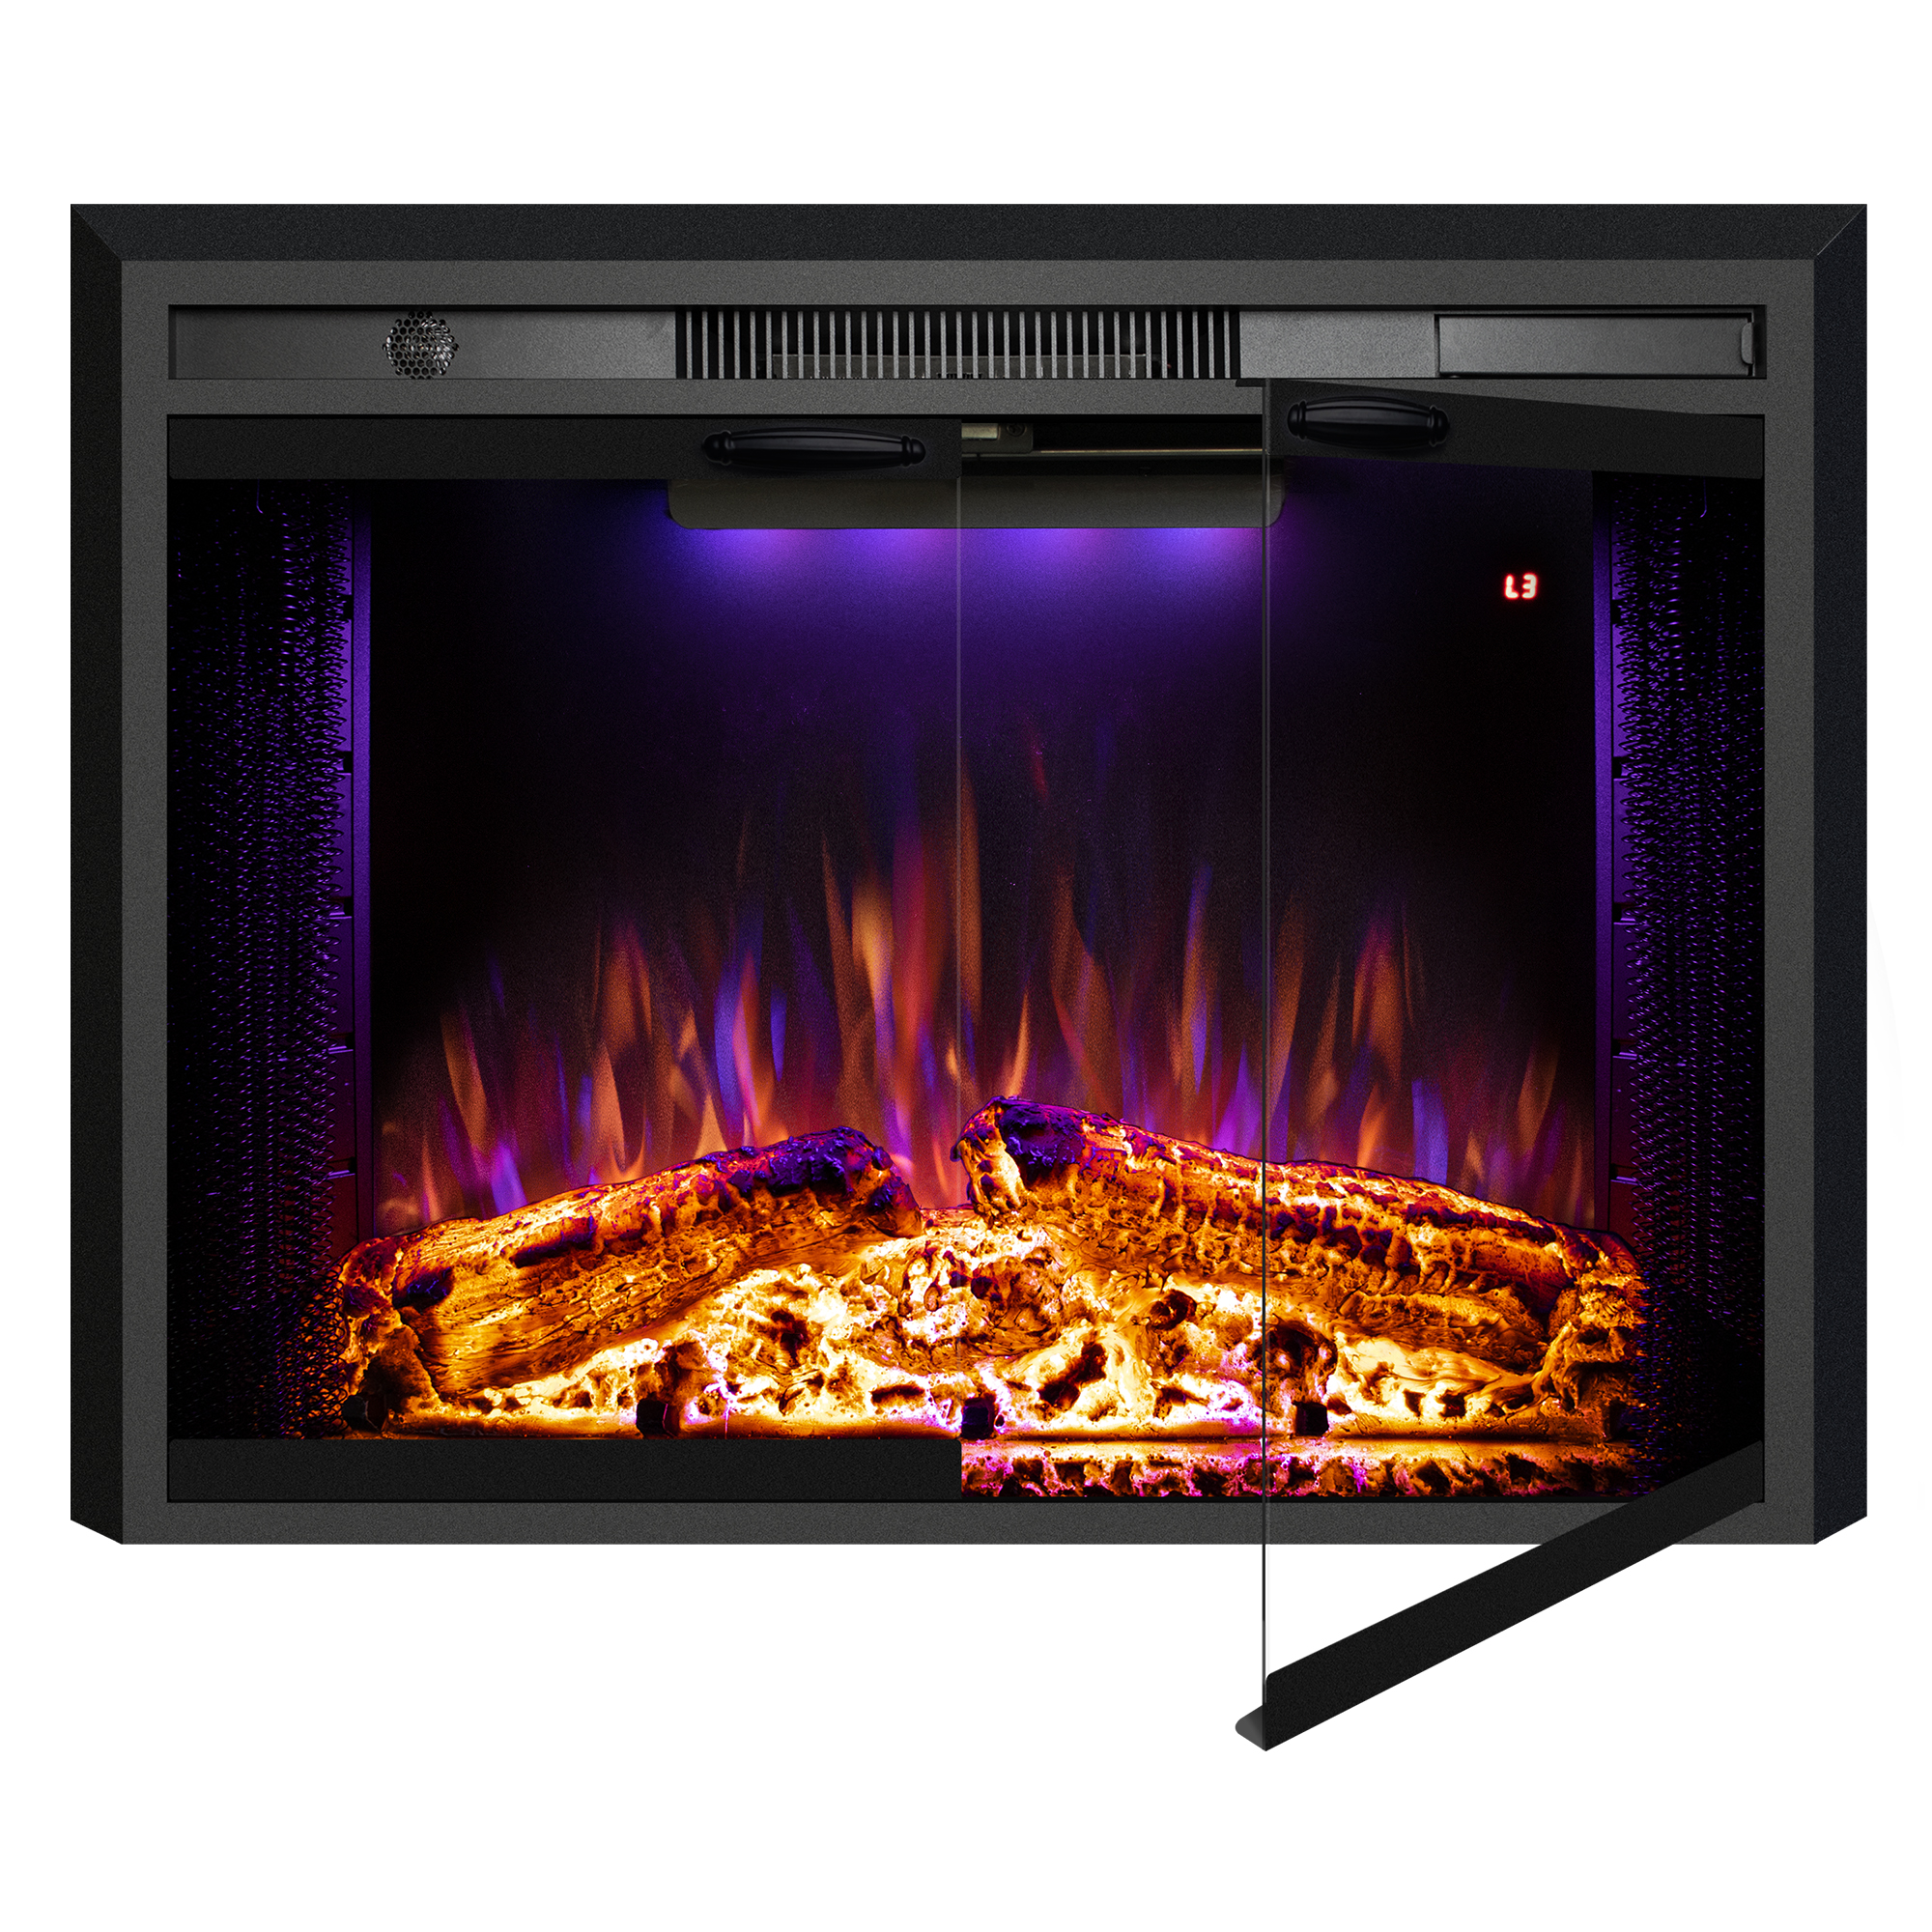 Valuxhome Electric Fireplace Inserts with Glass Door , Flames & Crackling Sounds